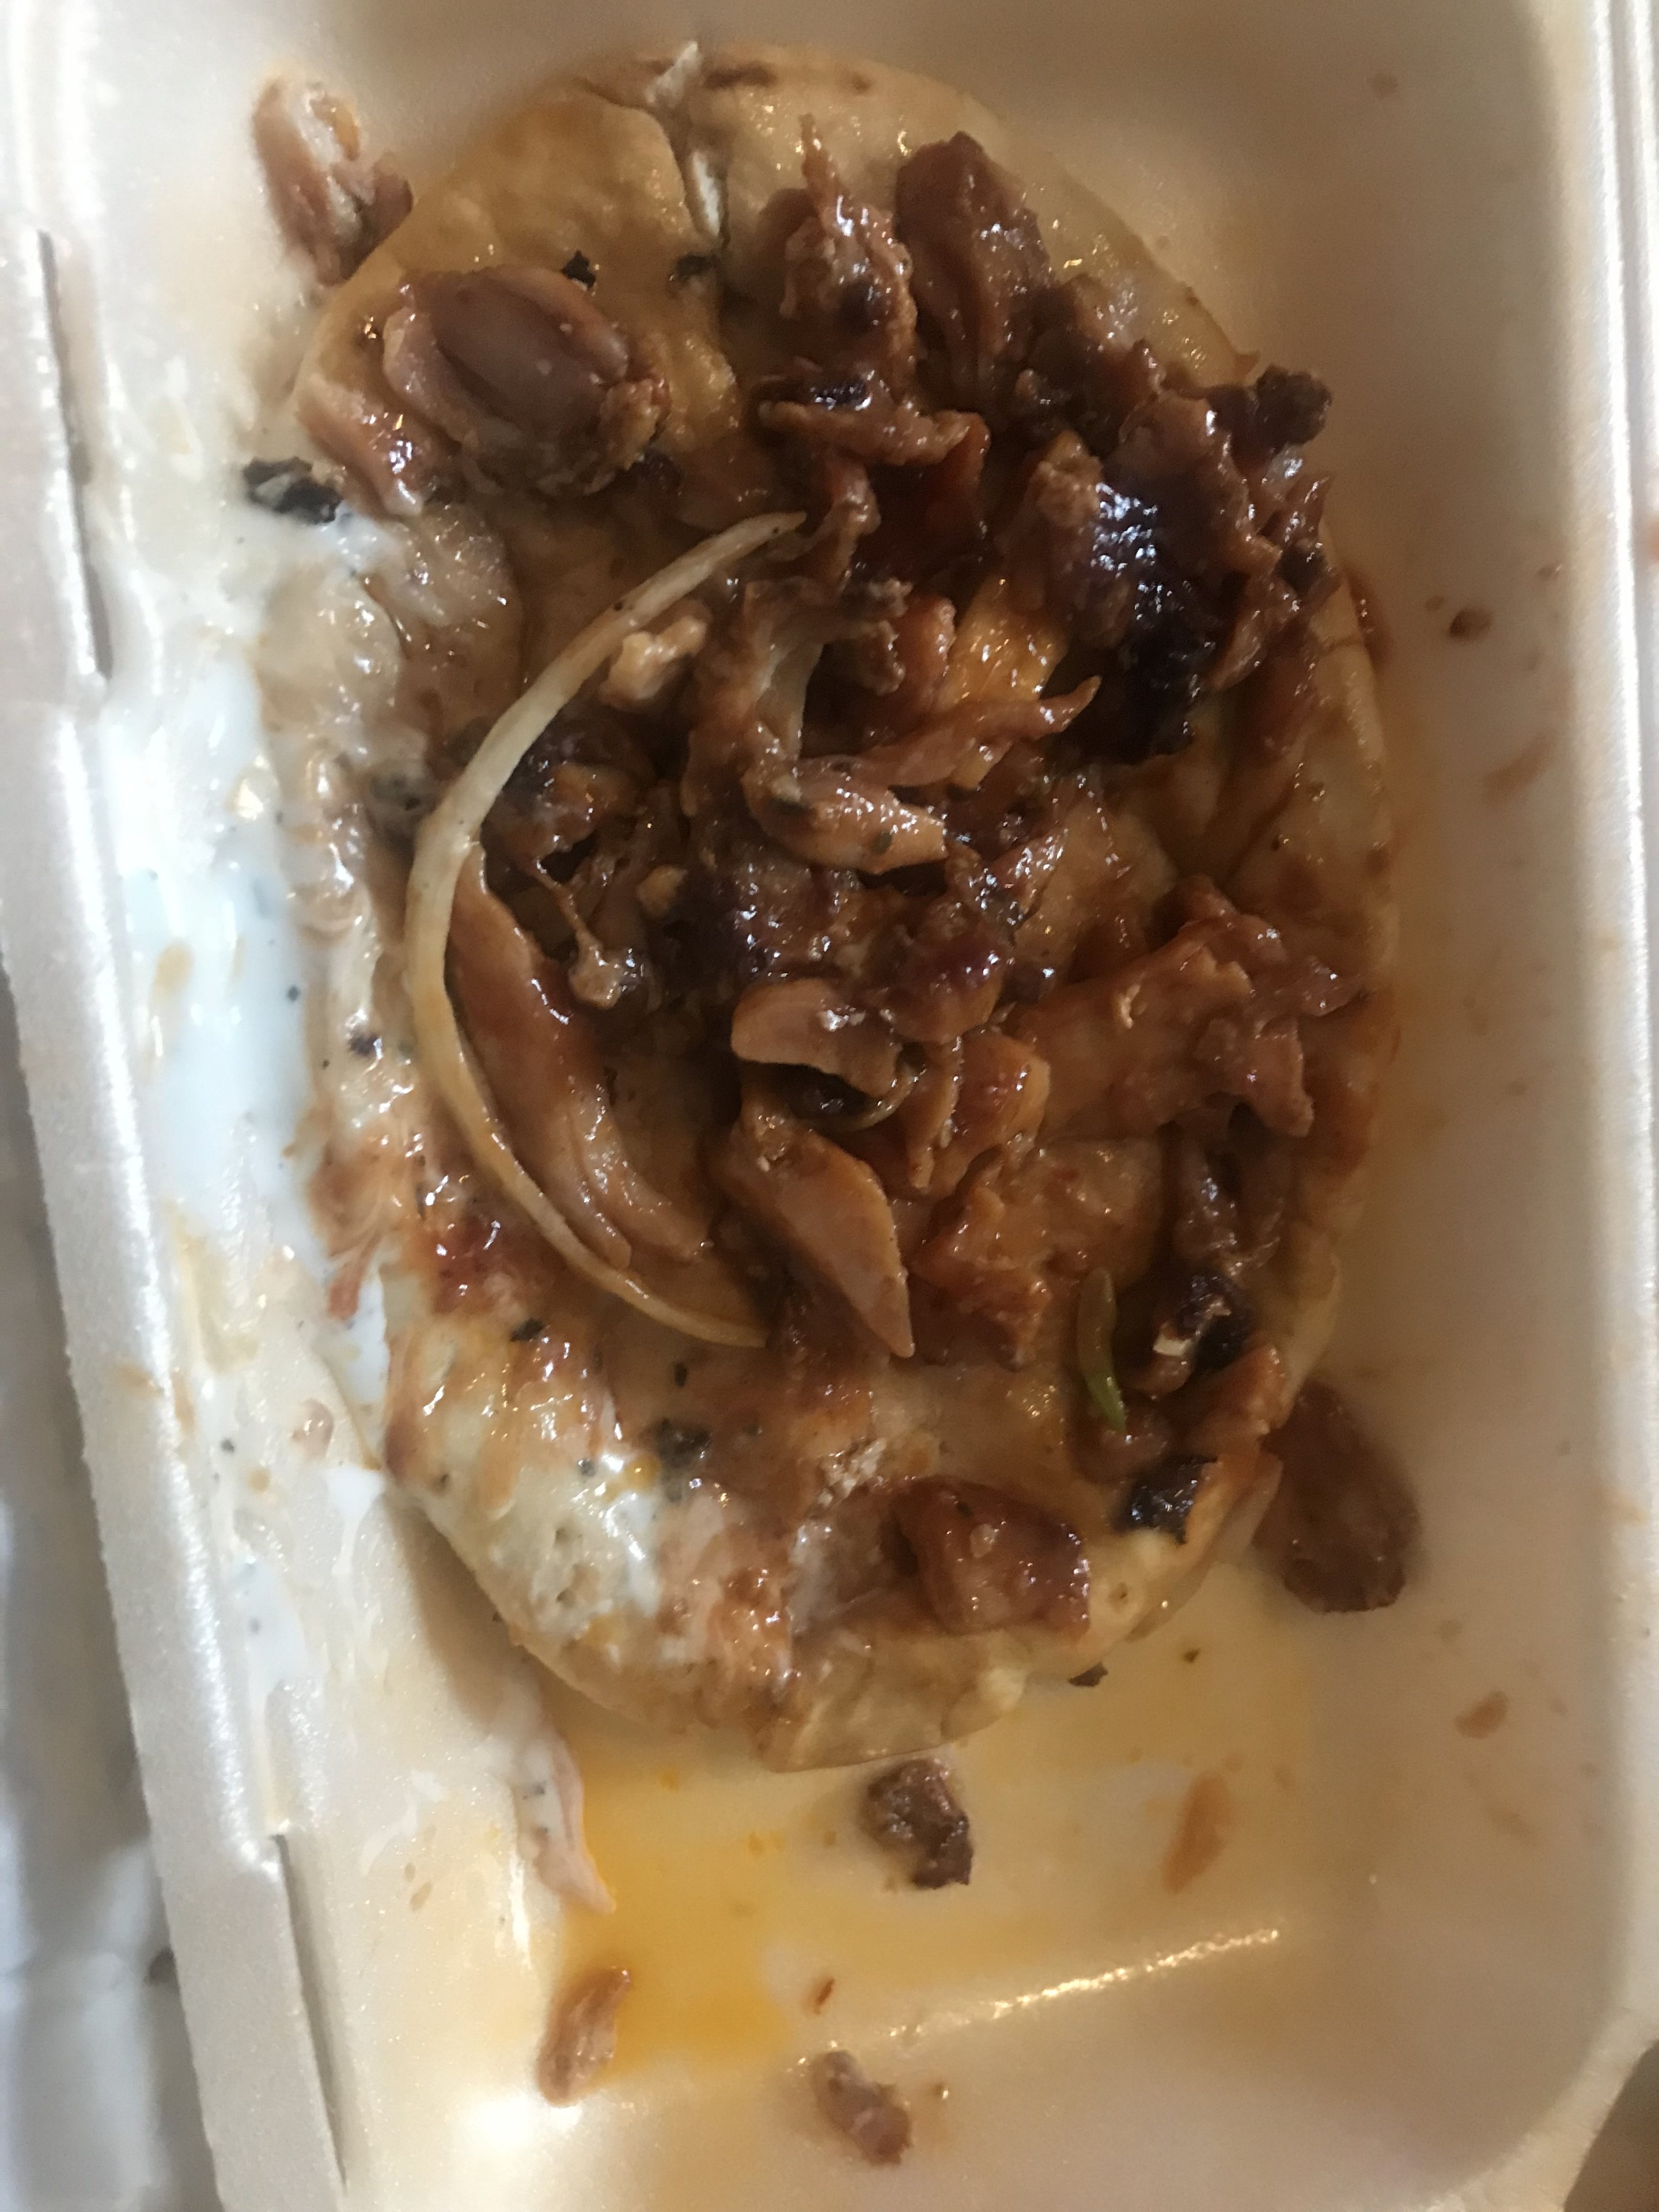 Dirty Takeaway Pictures Volume 3 - Page 459 - Food, Drink & Restaurants - PistonHeads